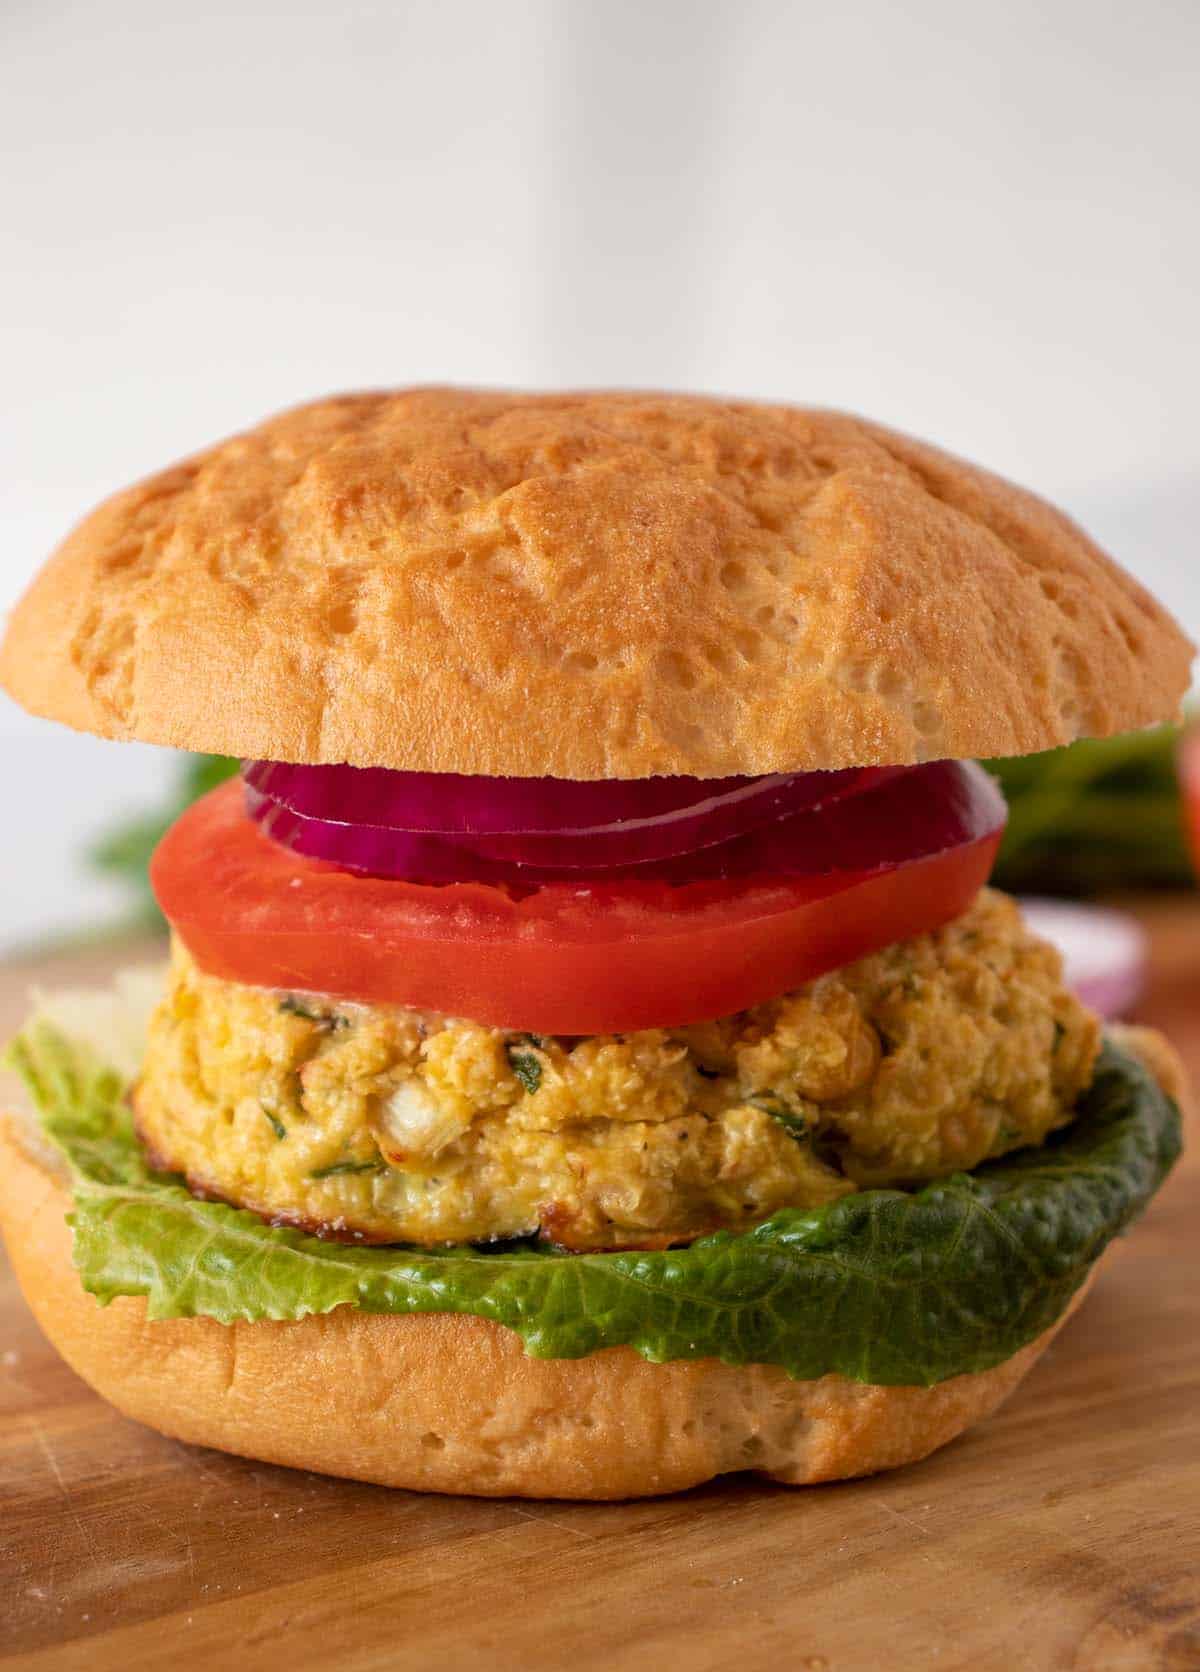 Chickpea burgers on a bun  with lettuce, tomato and red onion.